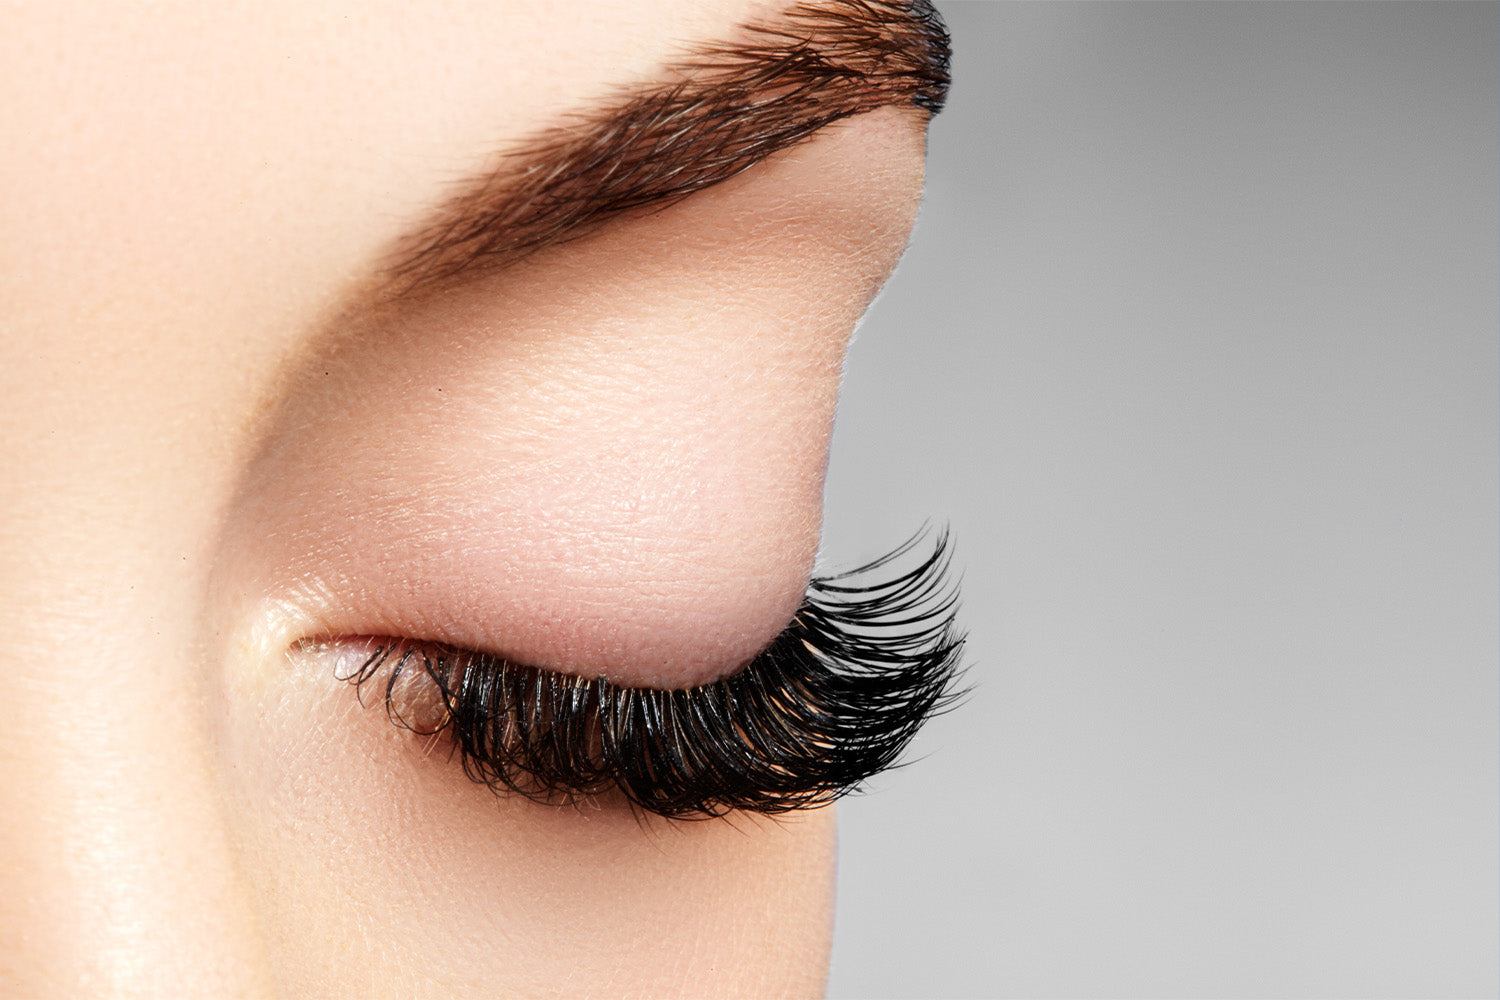 How To Make Your Lash Extensions Last Longer: 7 Tips From the Lash Experts  – Lashify